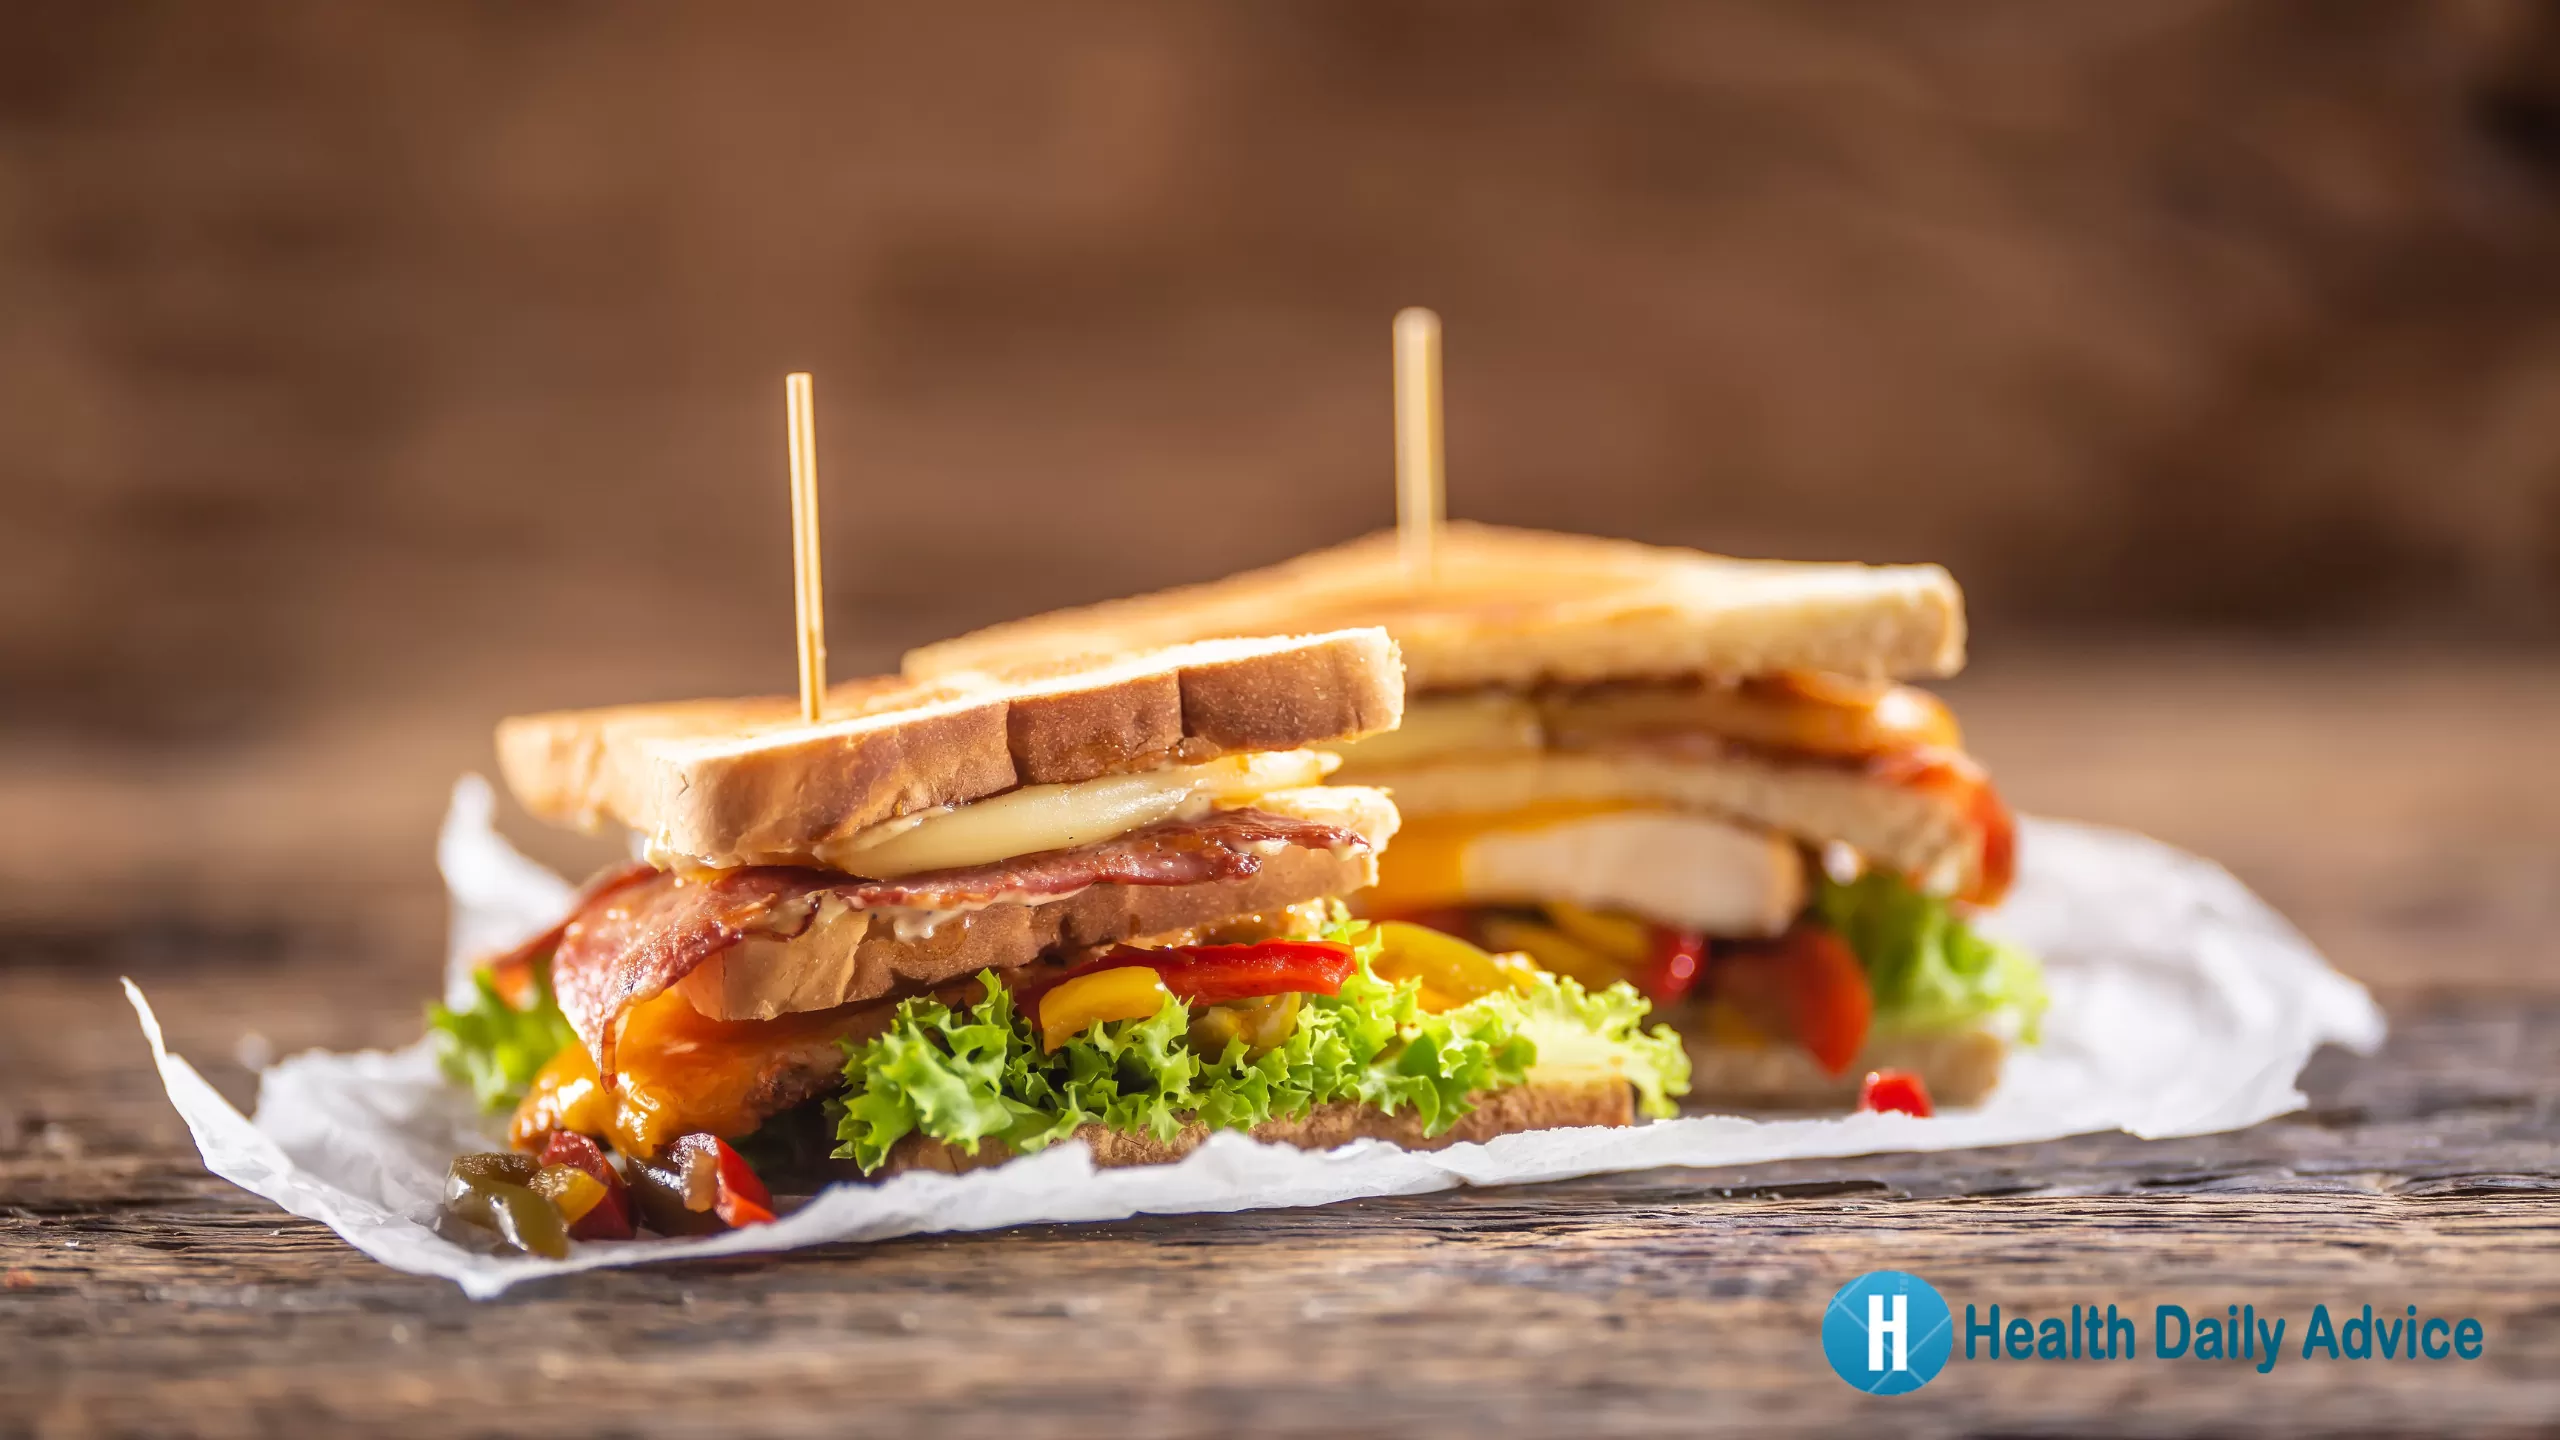 How to make Club Sandwich at Home